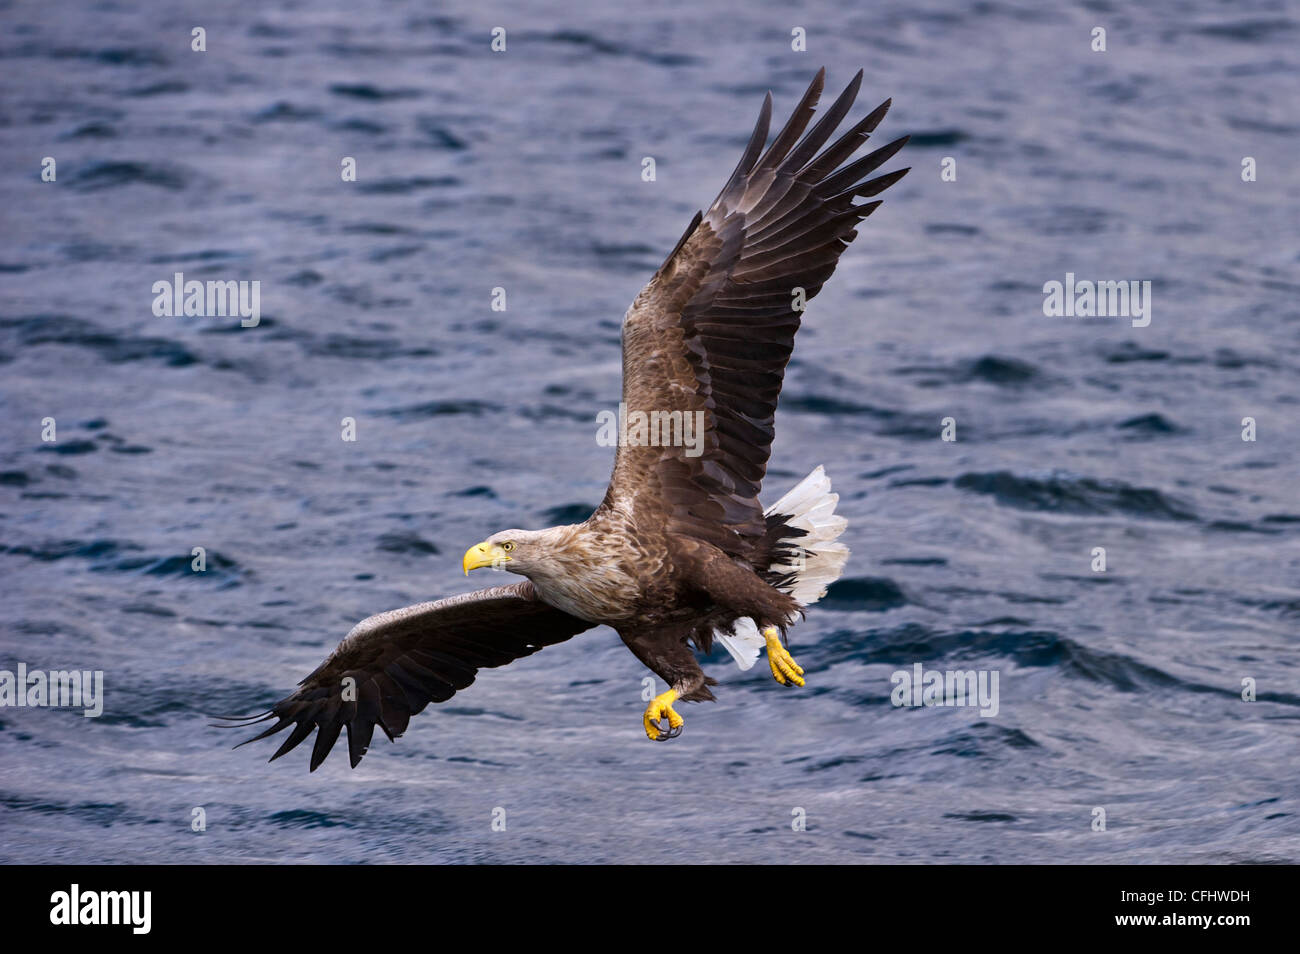 Male White-tailed Sea Eagle swooping to take a fish from the water's surface, Loch Na Keal, Isle of Mull, Scotland (baited) Stock Photo